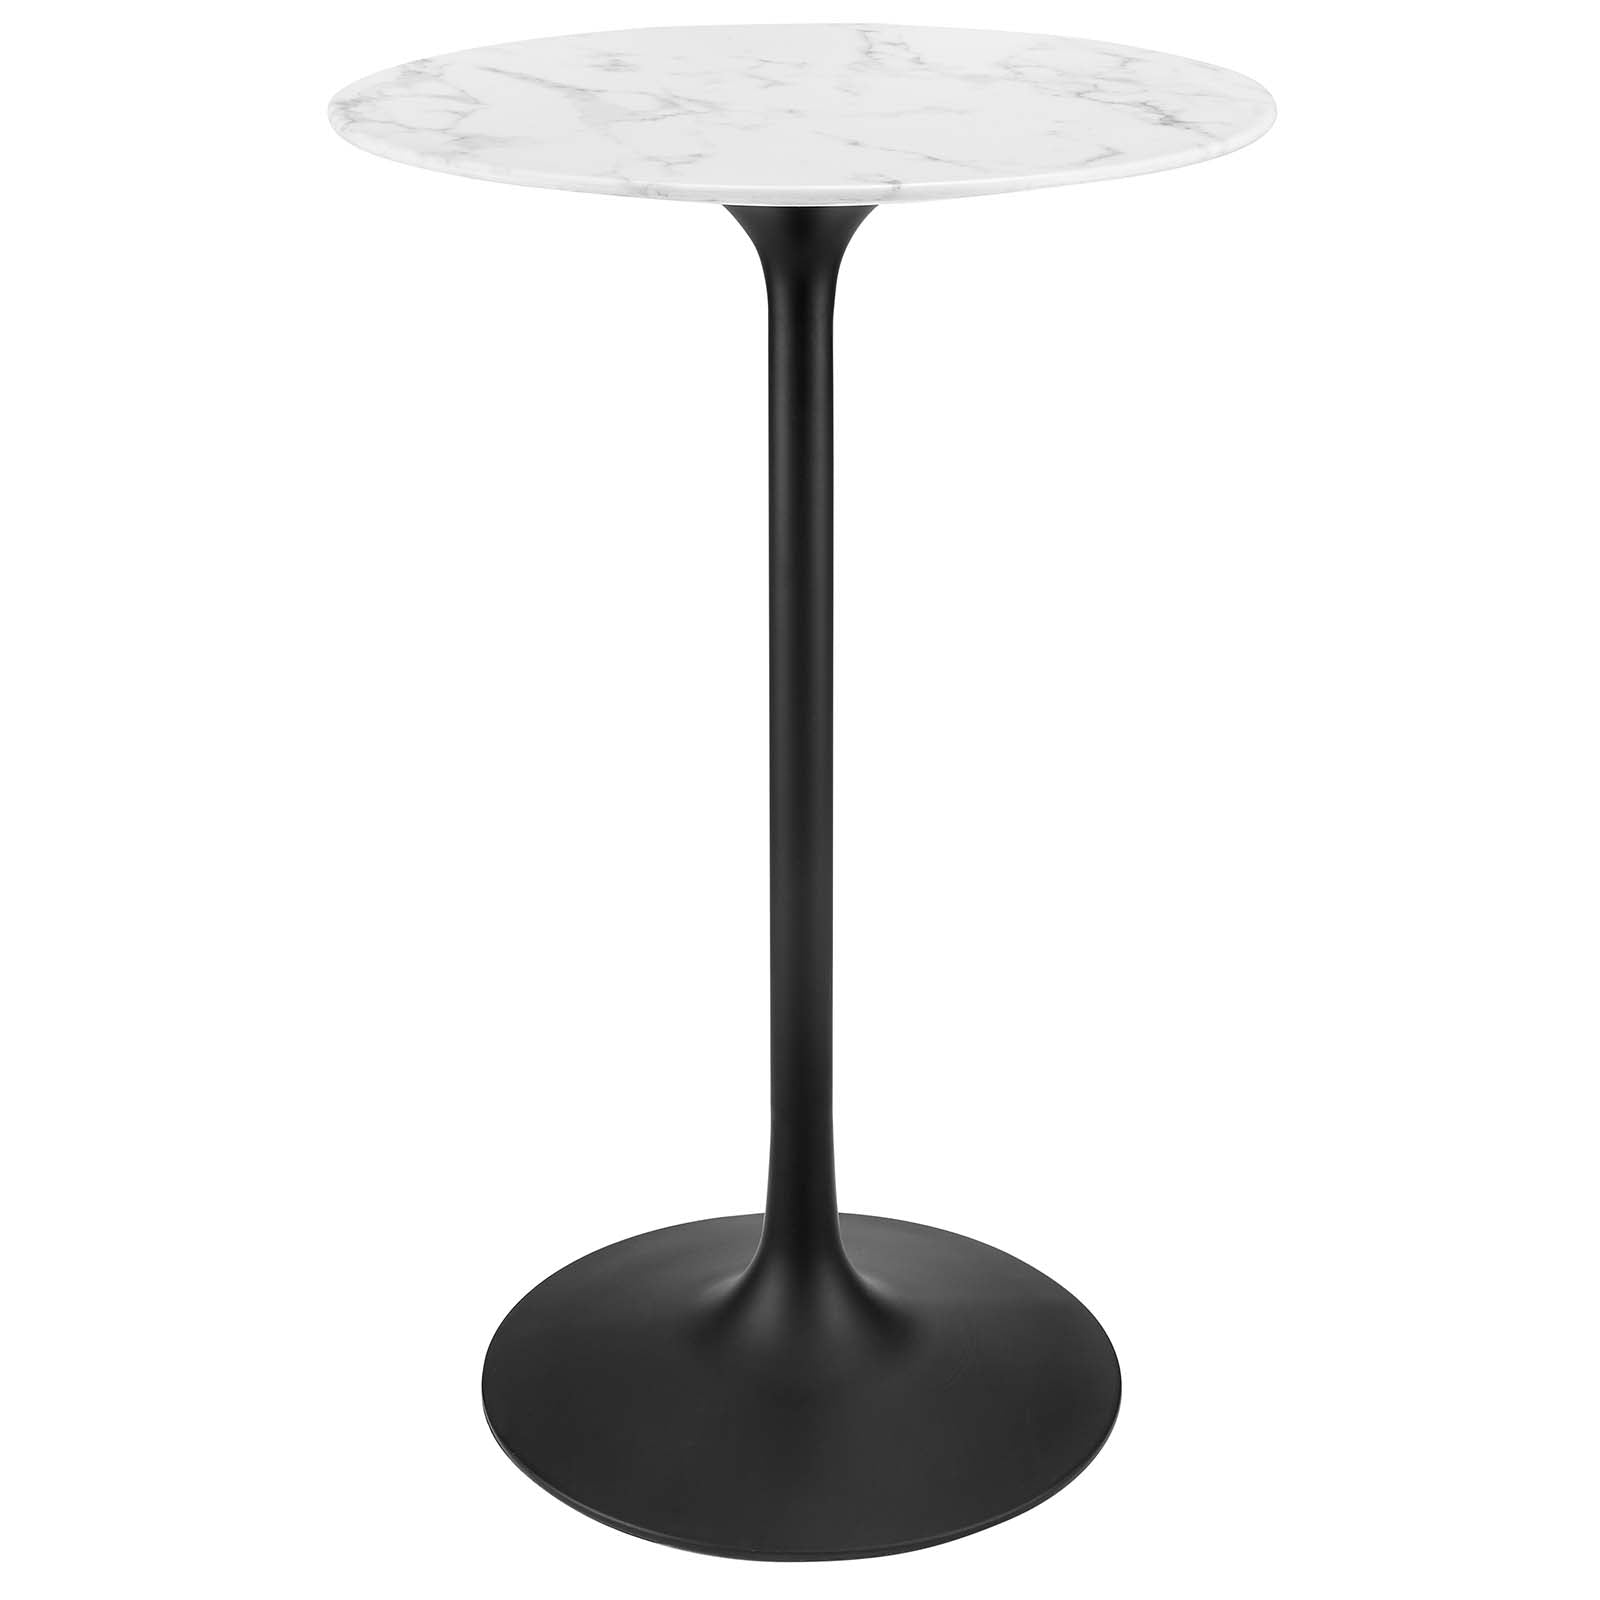 Lippa 28" Round Artificial Marble Bar Table - East Shore Modern Home Furnishings